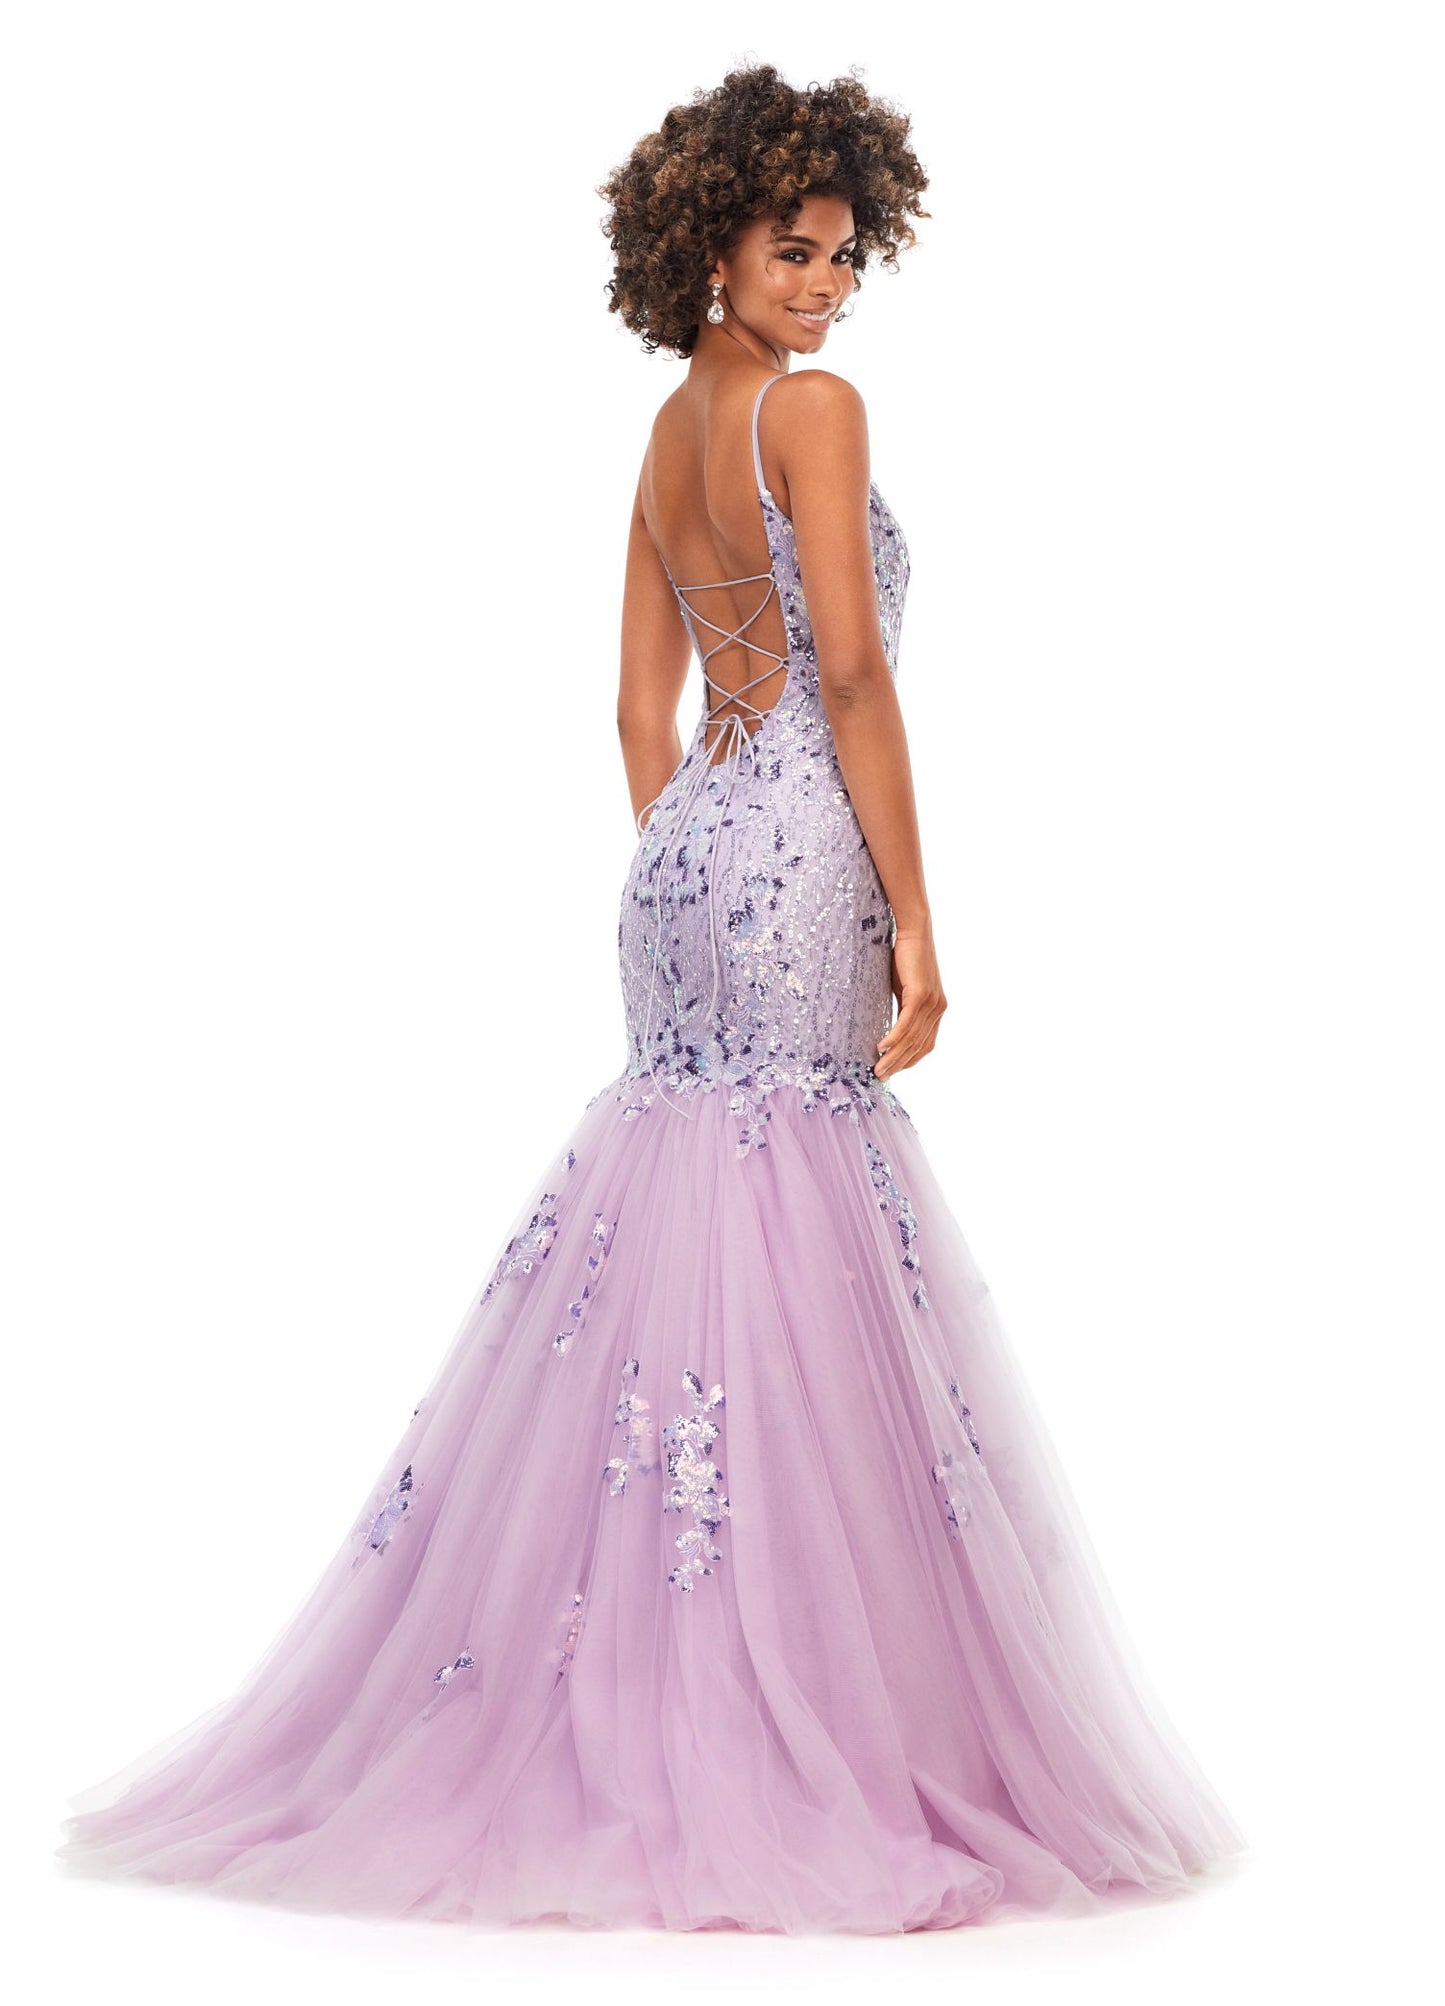 Ashley Lauren 11375 This spaghetti strap prom dress features sequin appliques throughout the bodice that cascade down onto the fit and flare skirt. The look is complete with an open lace up back. Straight Neckline Spaghetti Straps Fit & Flare Skirt Tulle & Sequin Applique COLORS: Sky, Lilac